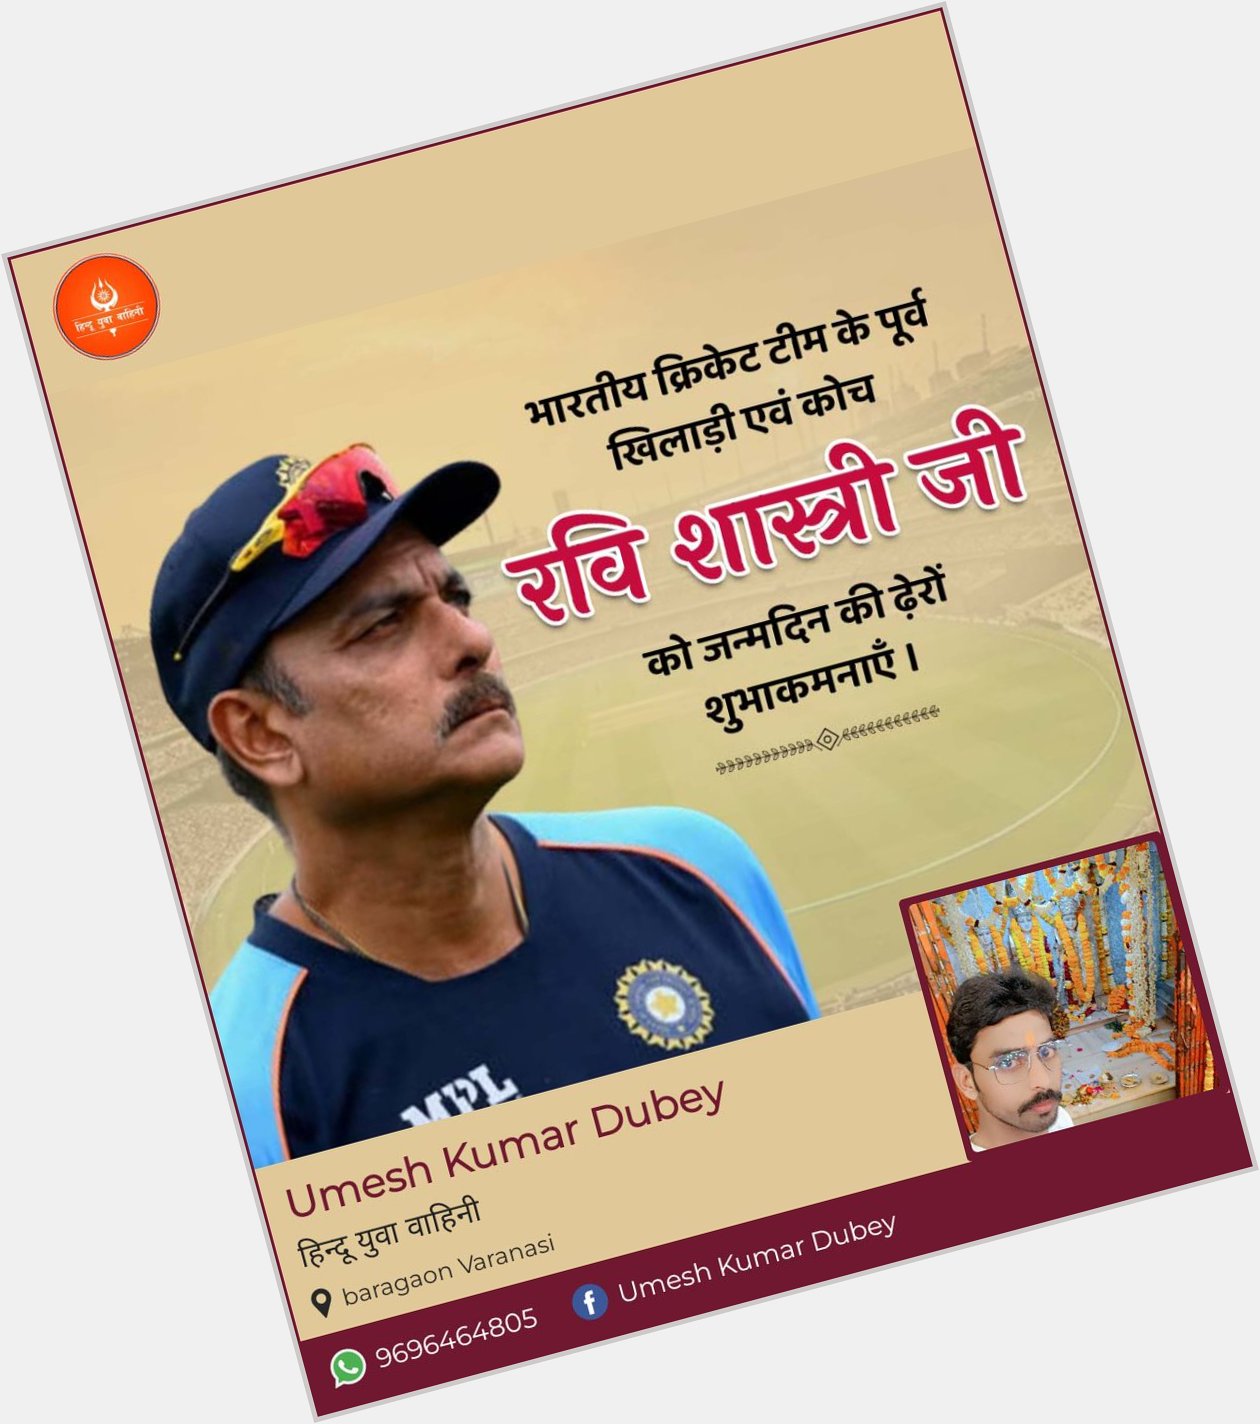 Former player and coach of the Indian cricket team

Mr Ravi Shastri

Happy birthday to 